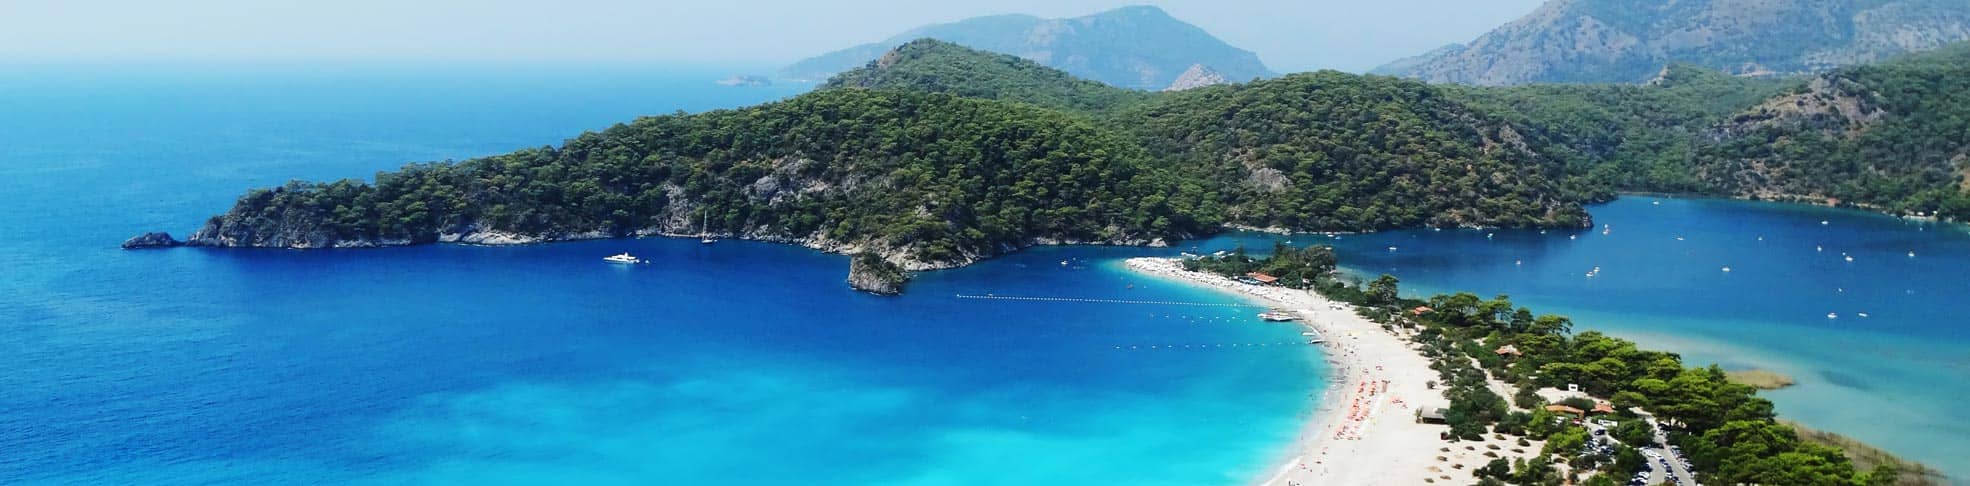 Cheap holidays to turkey in may